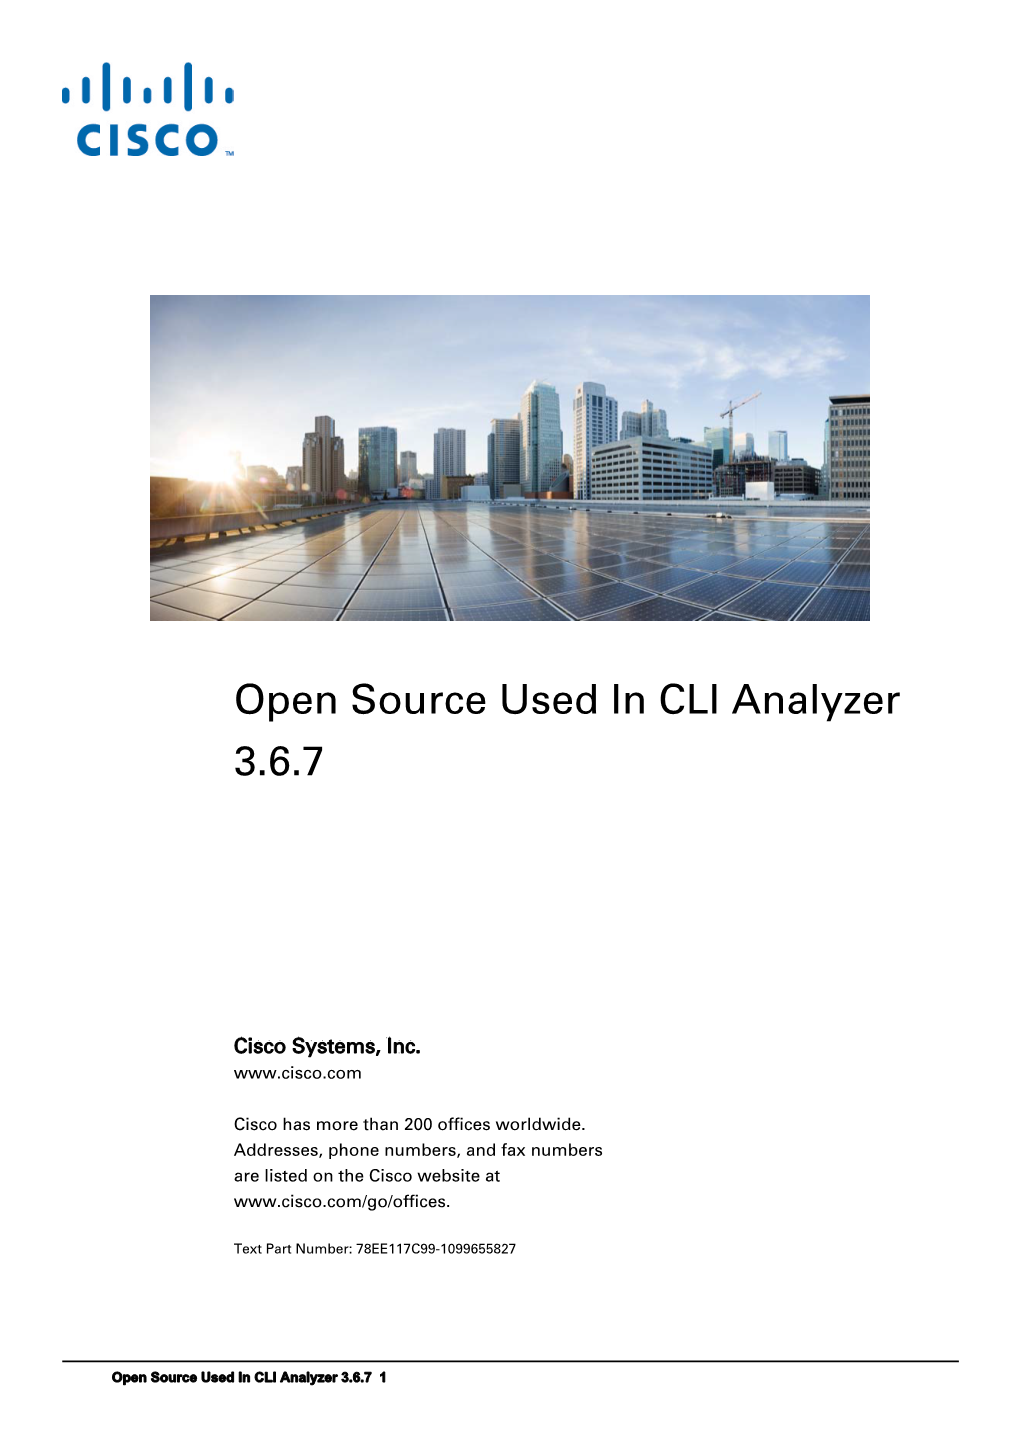 Open Source Used in CLI Analyzer 3.6.7